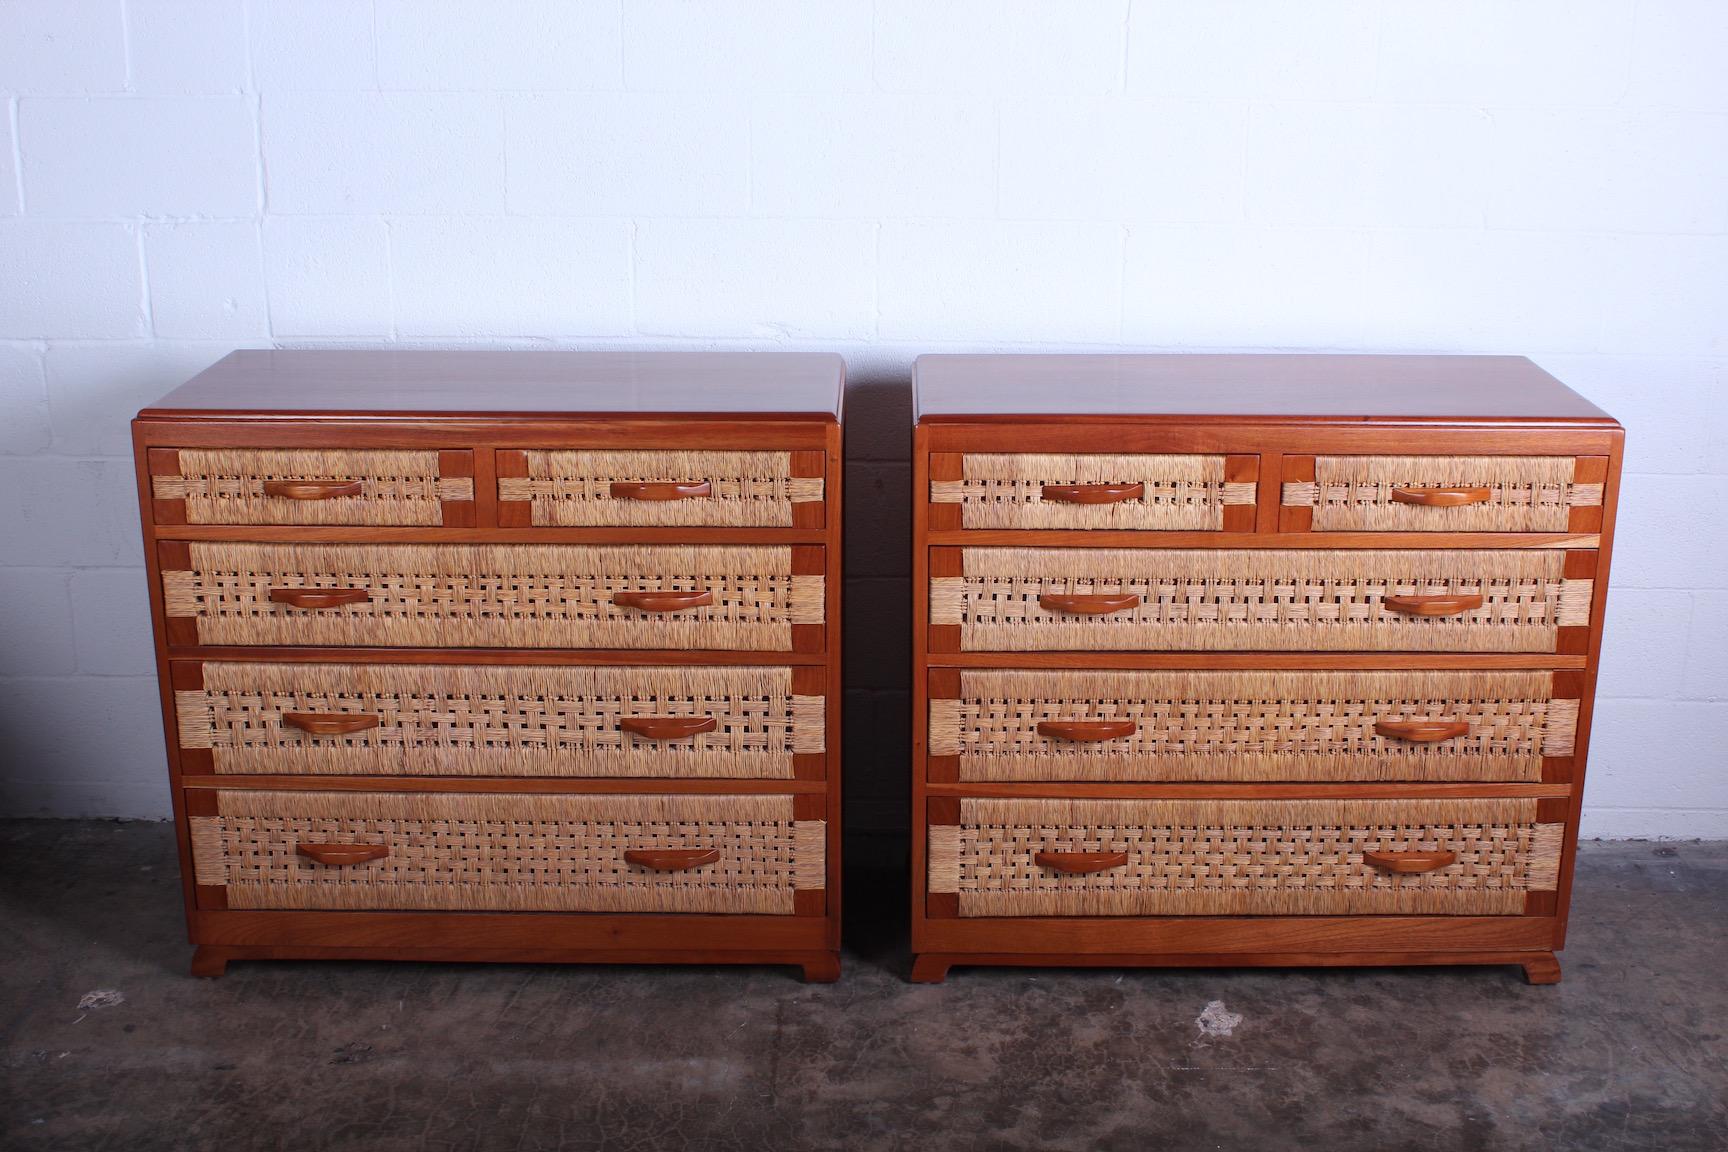 A pair of mahogany dressers with woven drawer fronts. Made in Mexico.